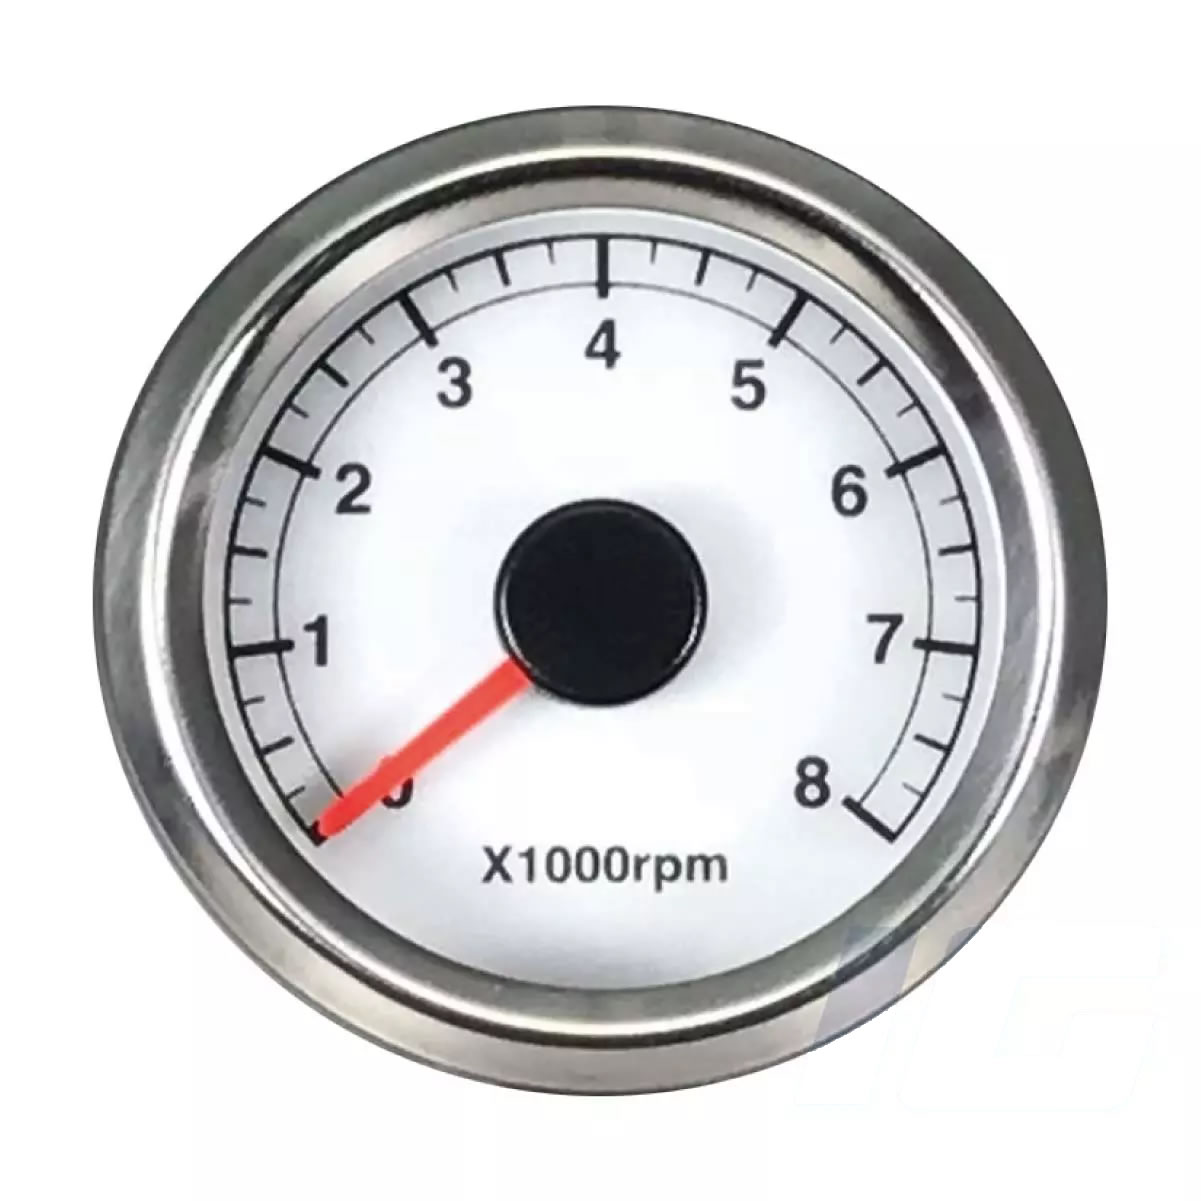 White Face Universal Aftermarket Gauge - Tachometer For Motorcycle